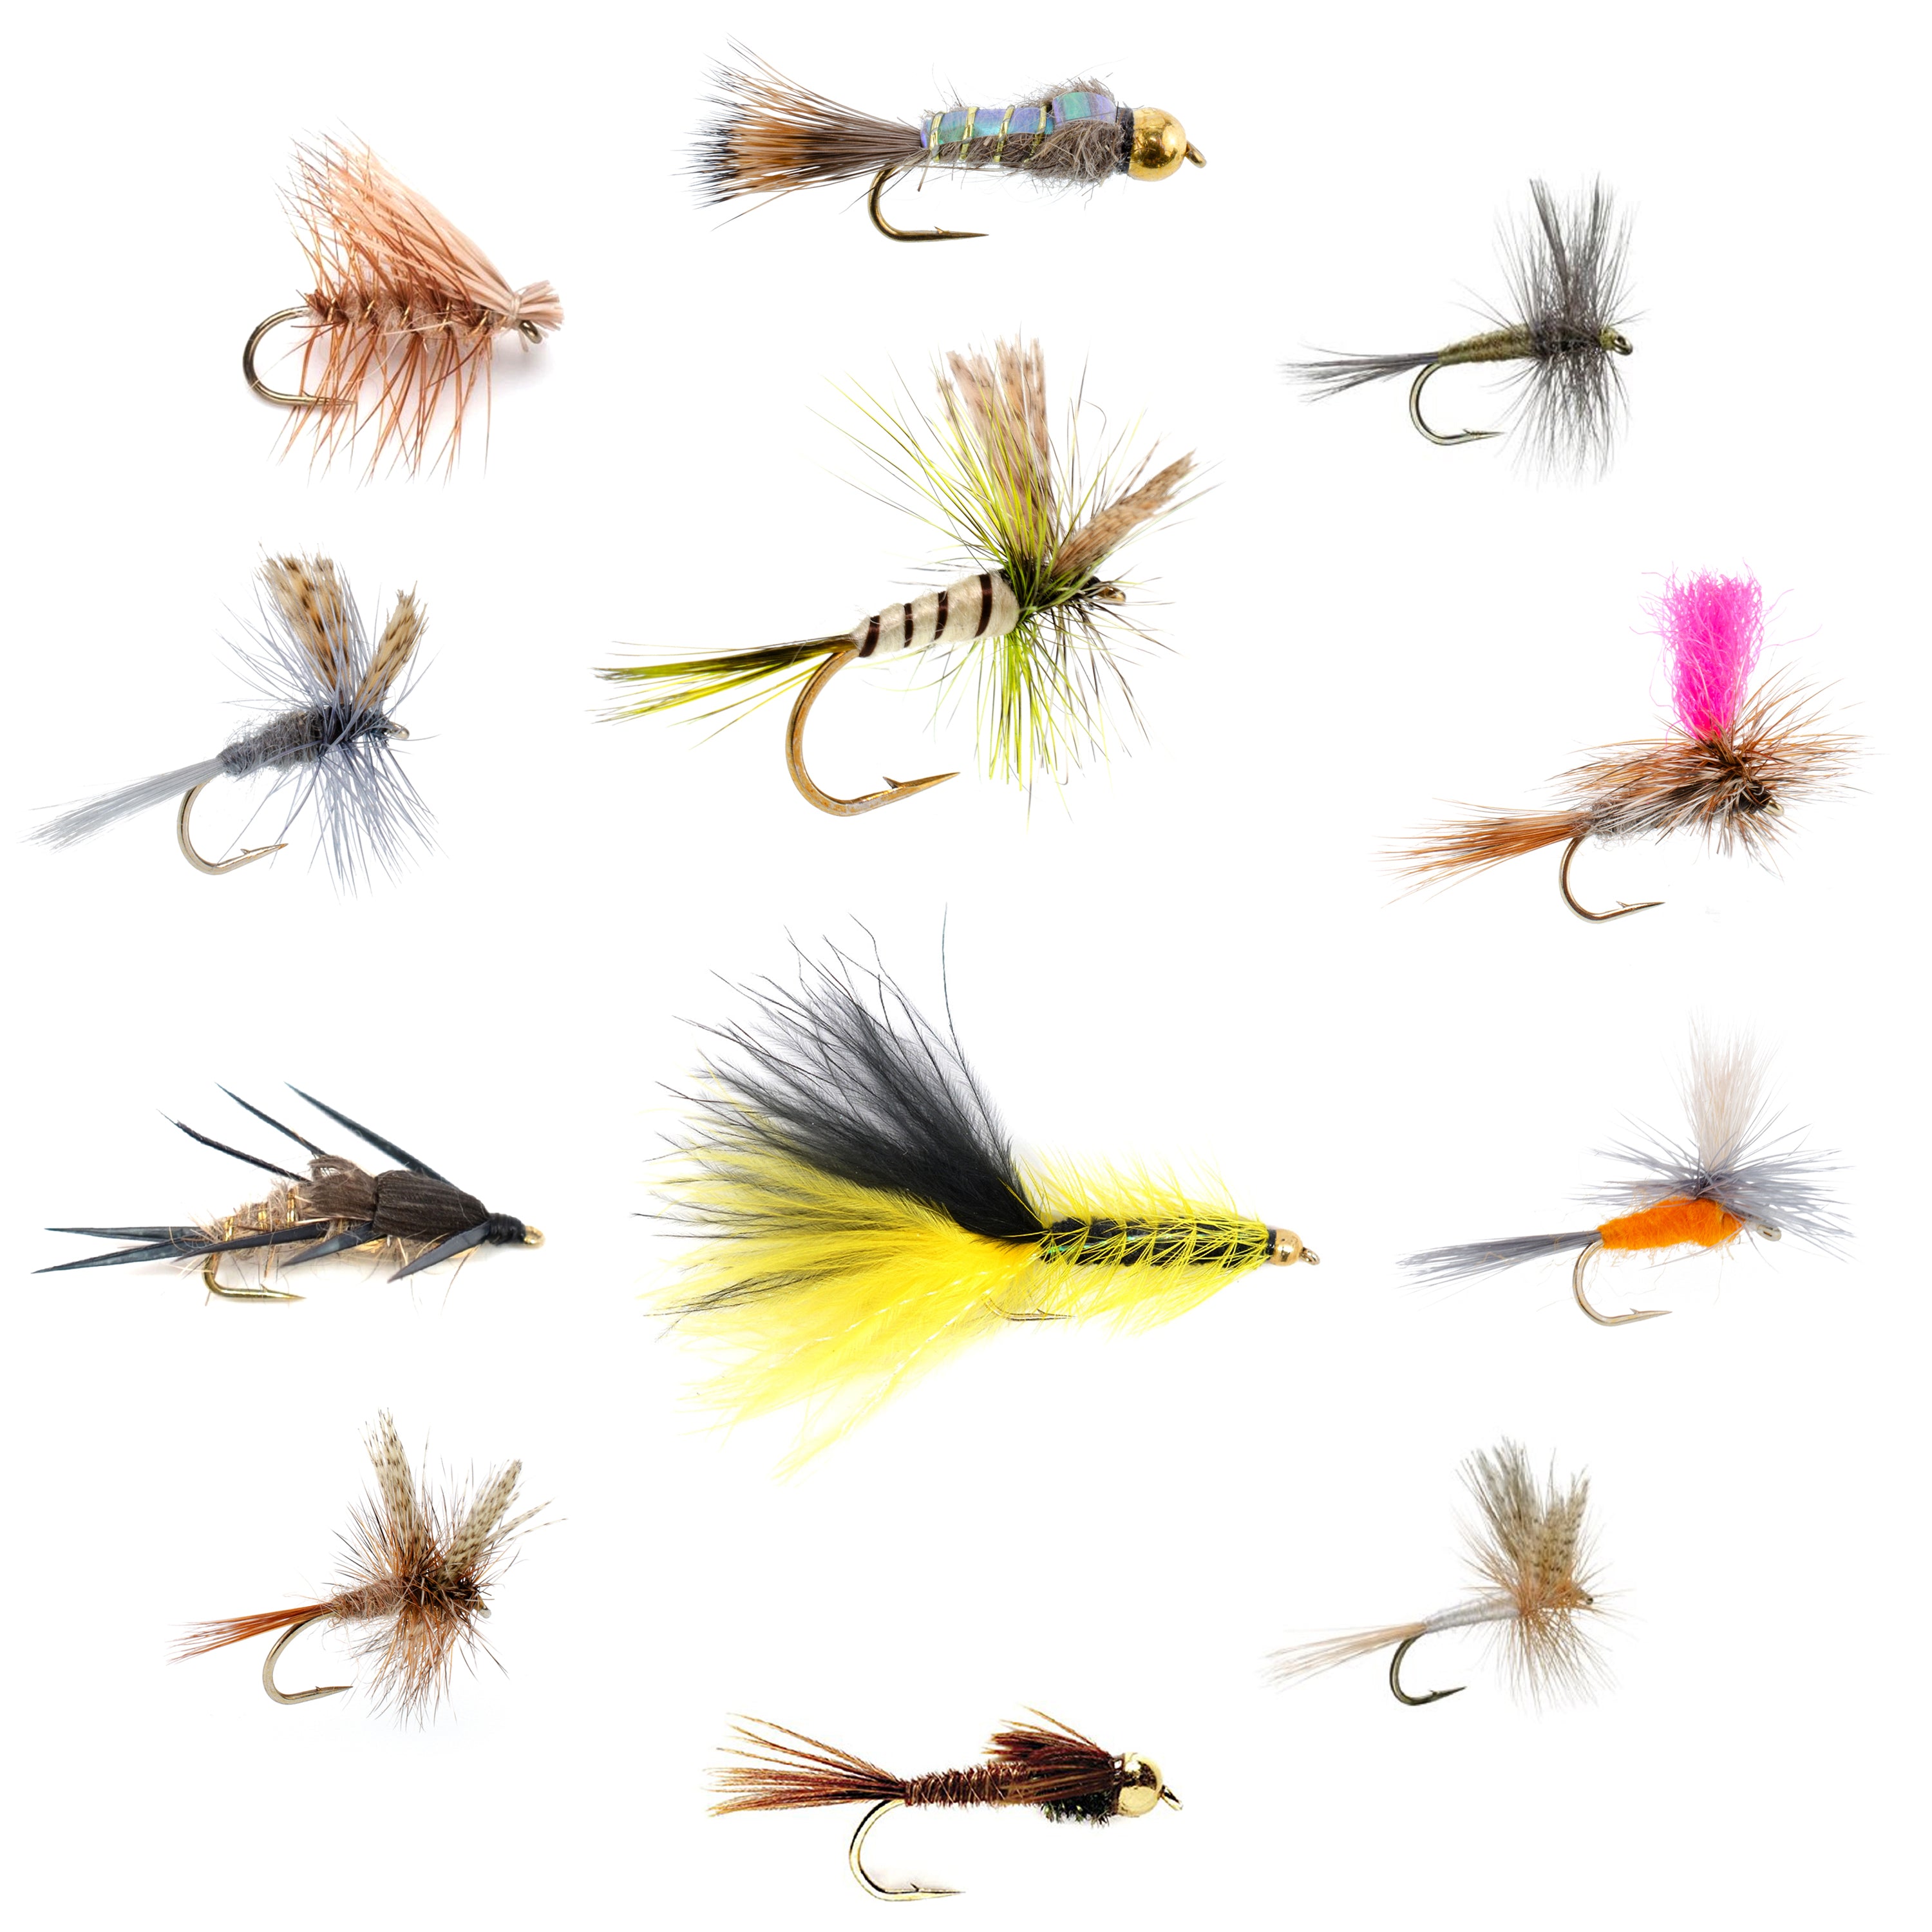 Dry Fly Assortment - 48 Flies in 12 Trout Crushing Patterns - Sizes 12-14